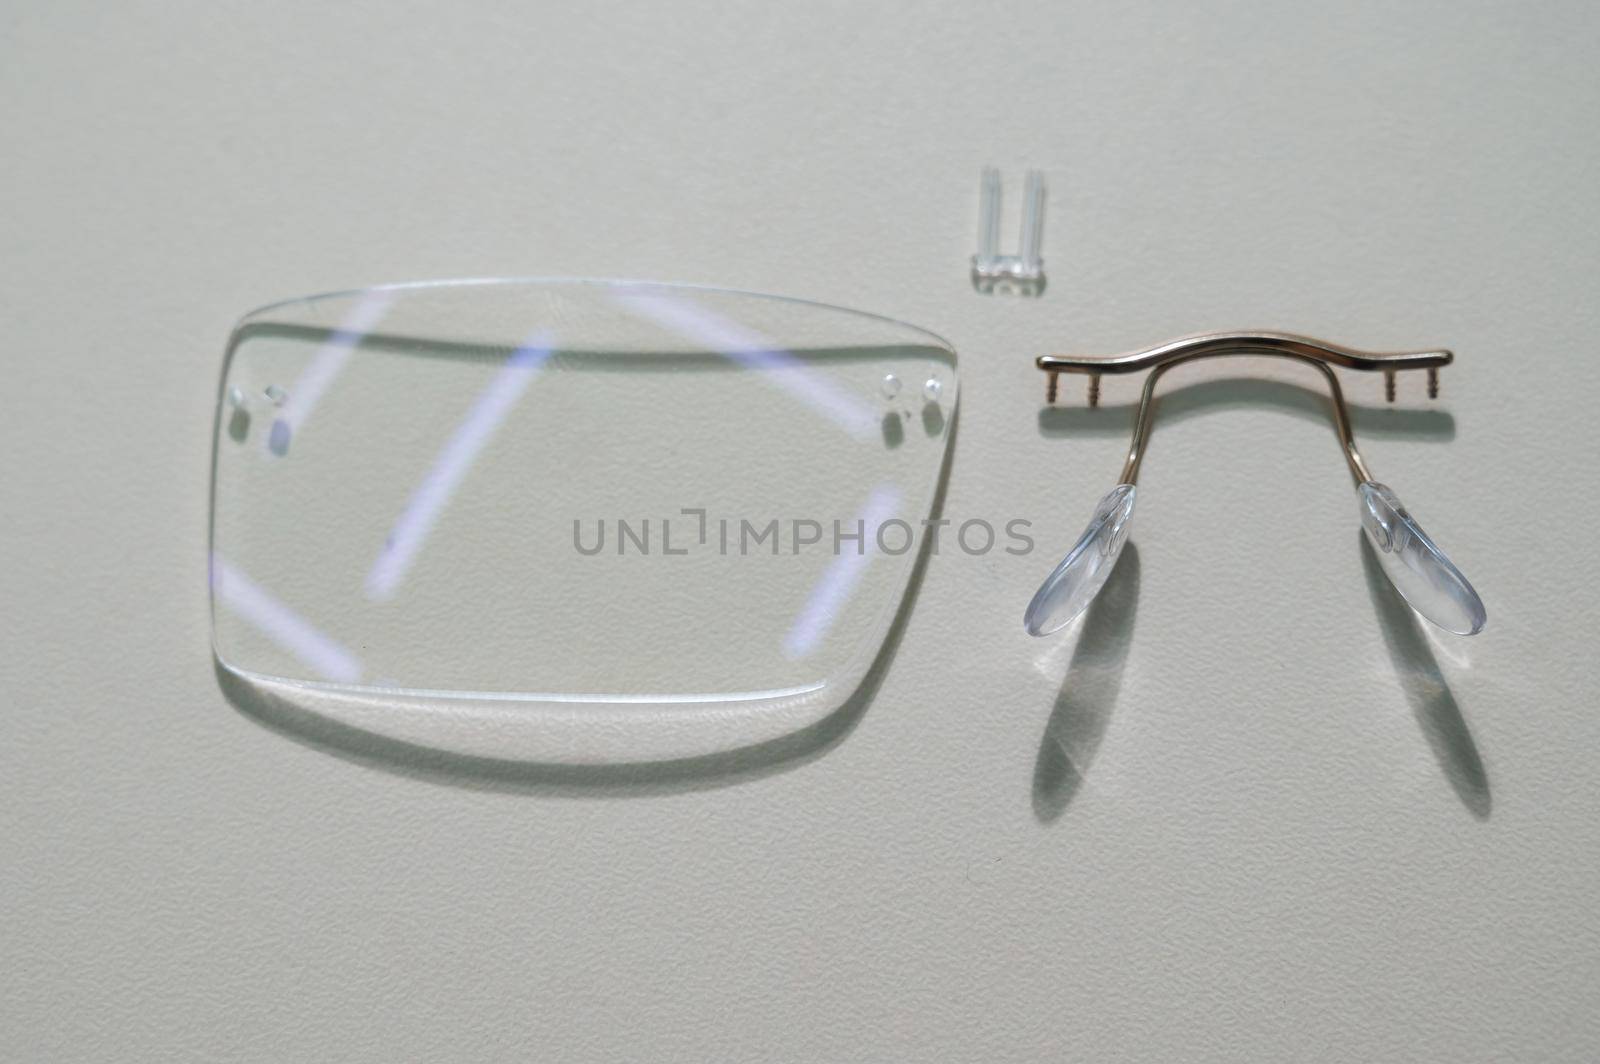 Disassembled glasses and instruments by an ophthalmologist